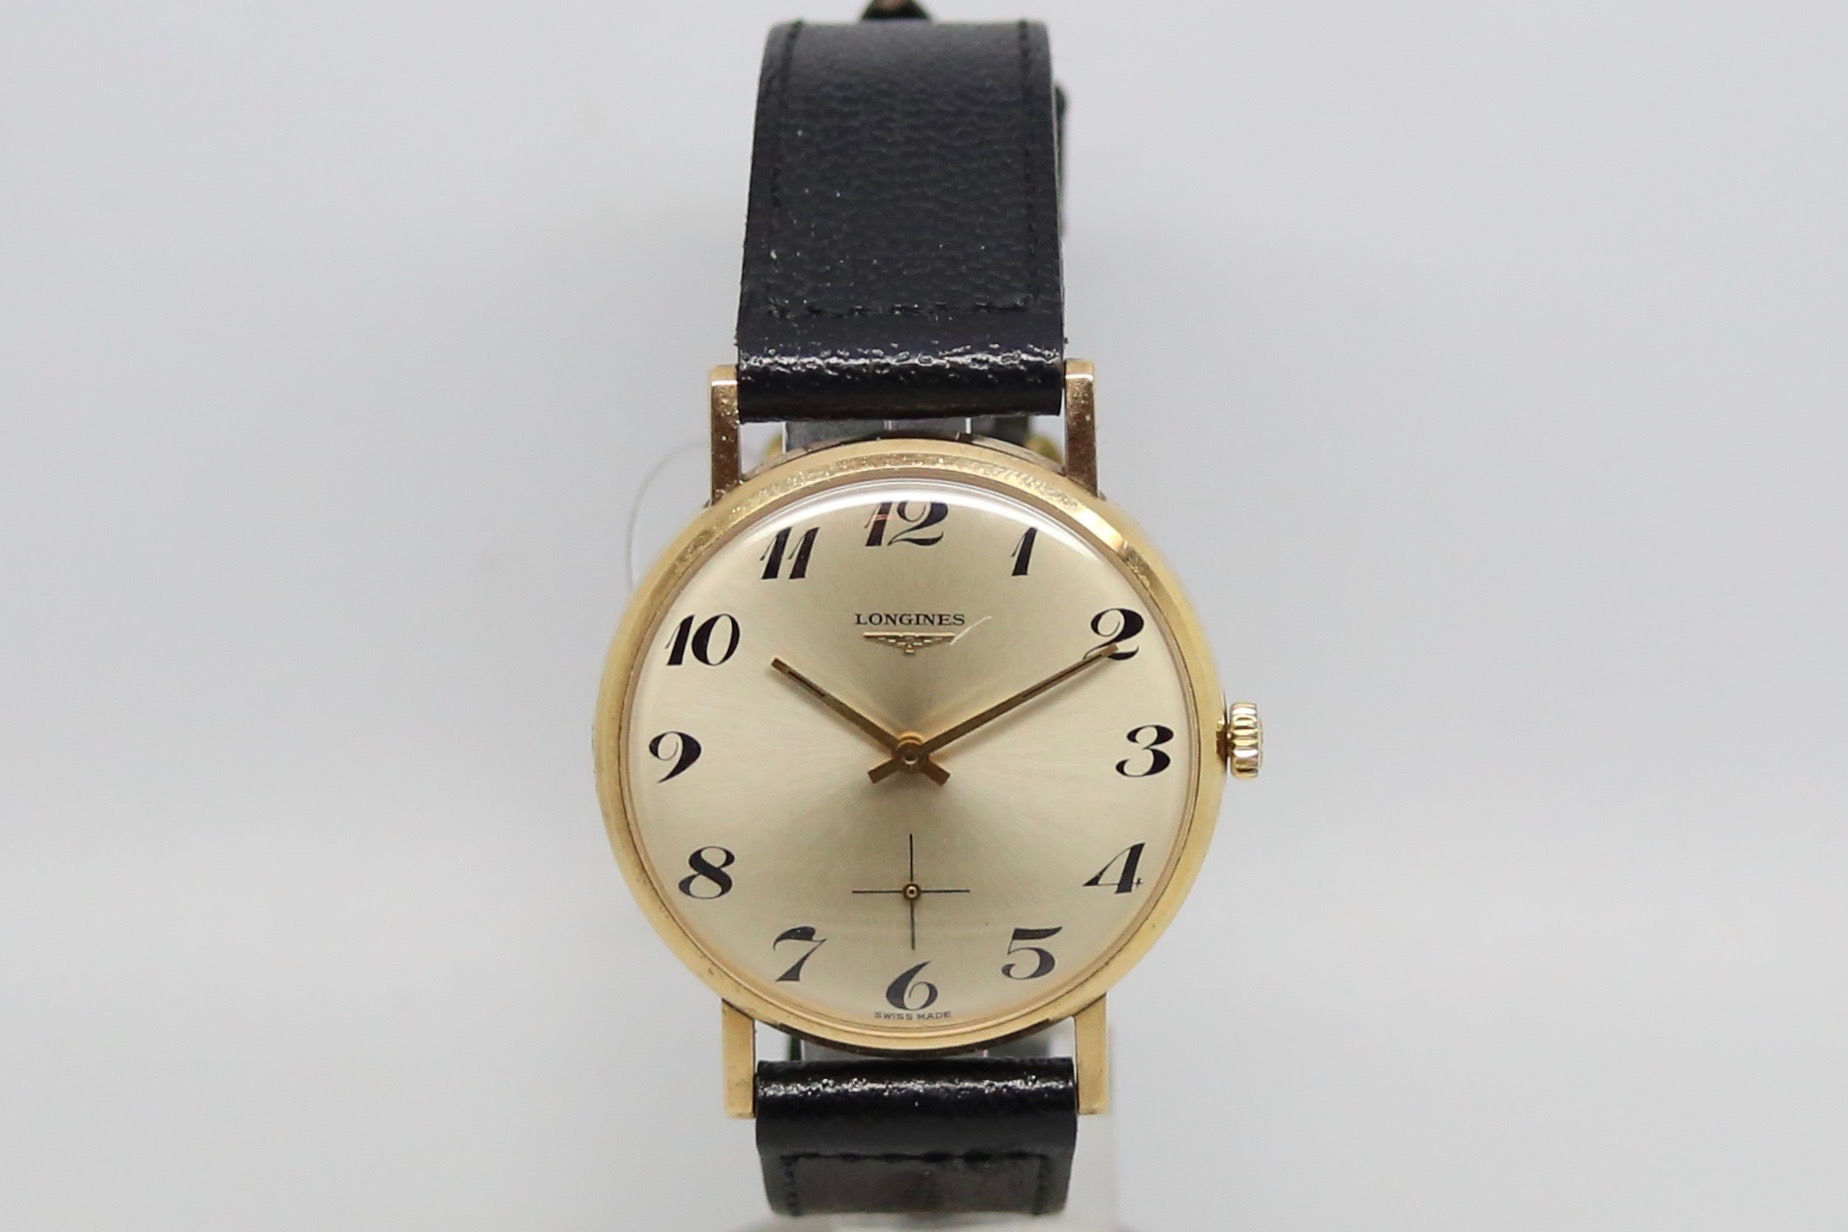 Gentleman's Longines Gold Vintage Wristwatch, circular dial with interesting arabic numerals with - Image 2 of 4